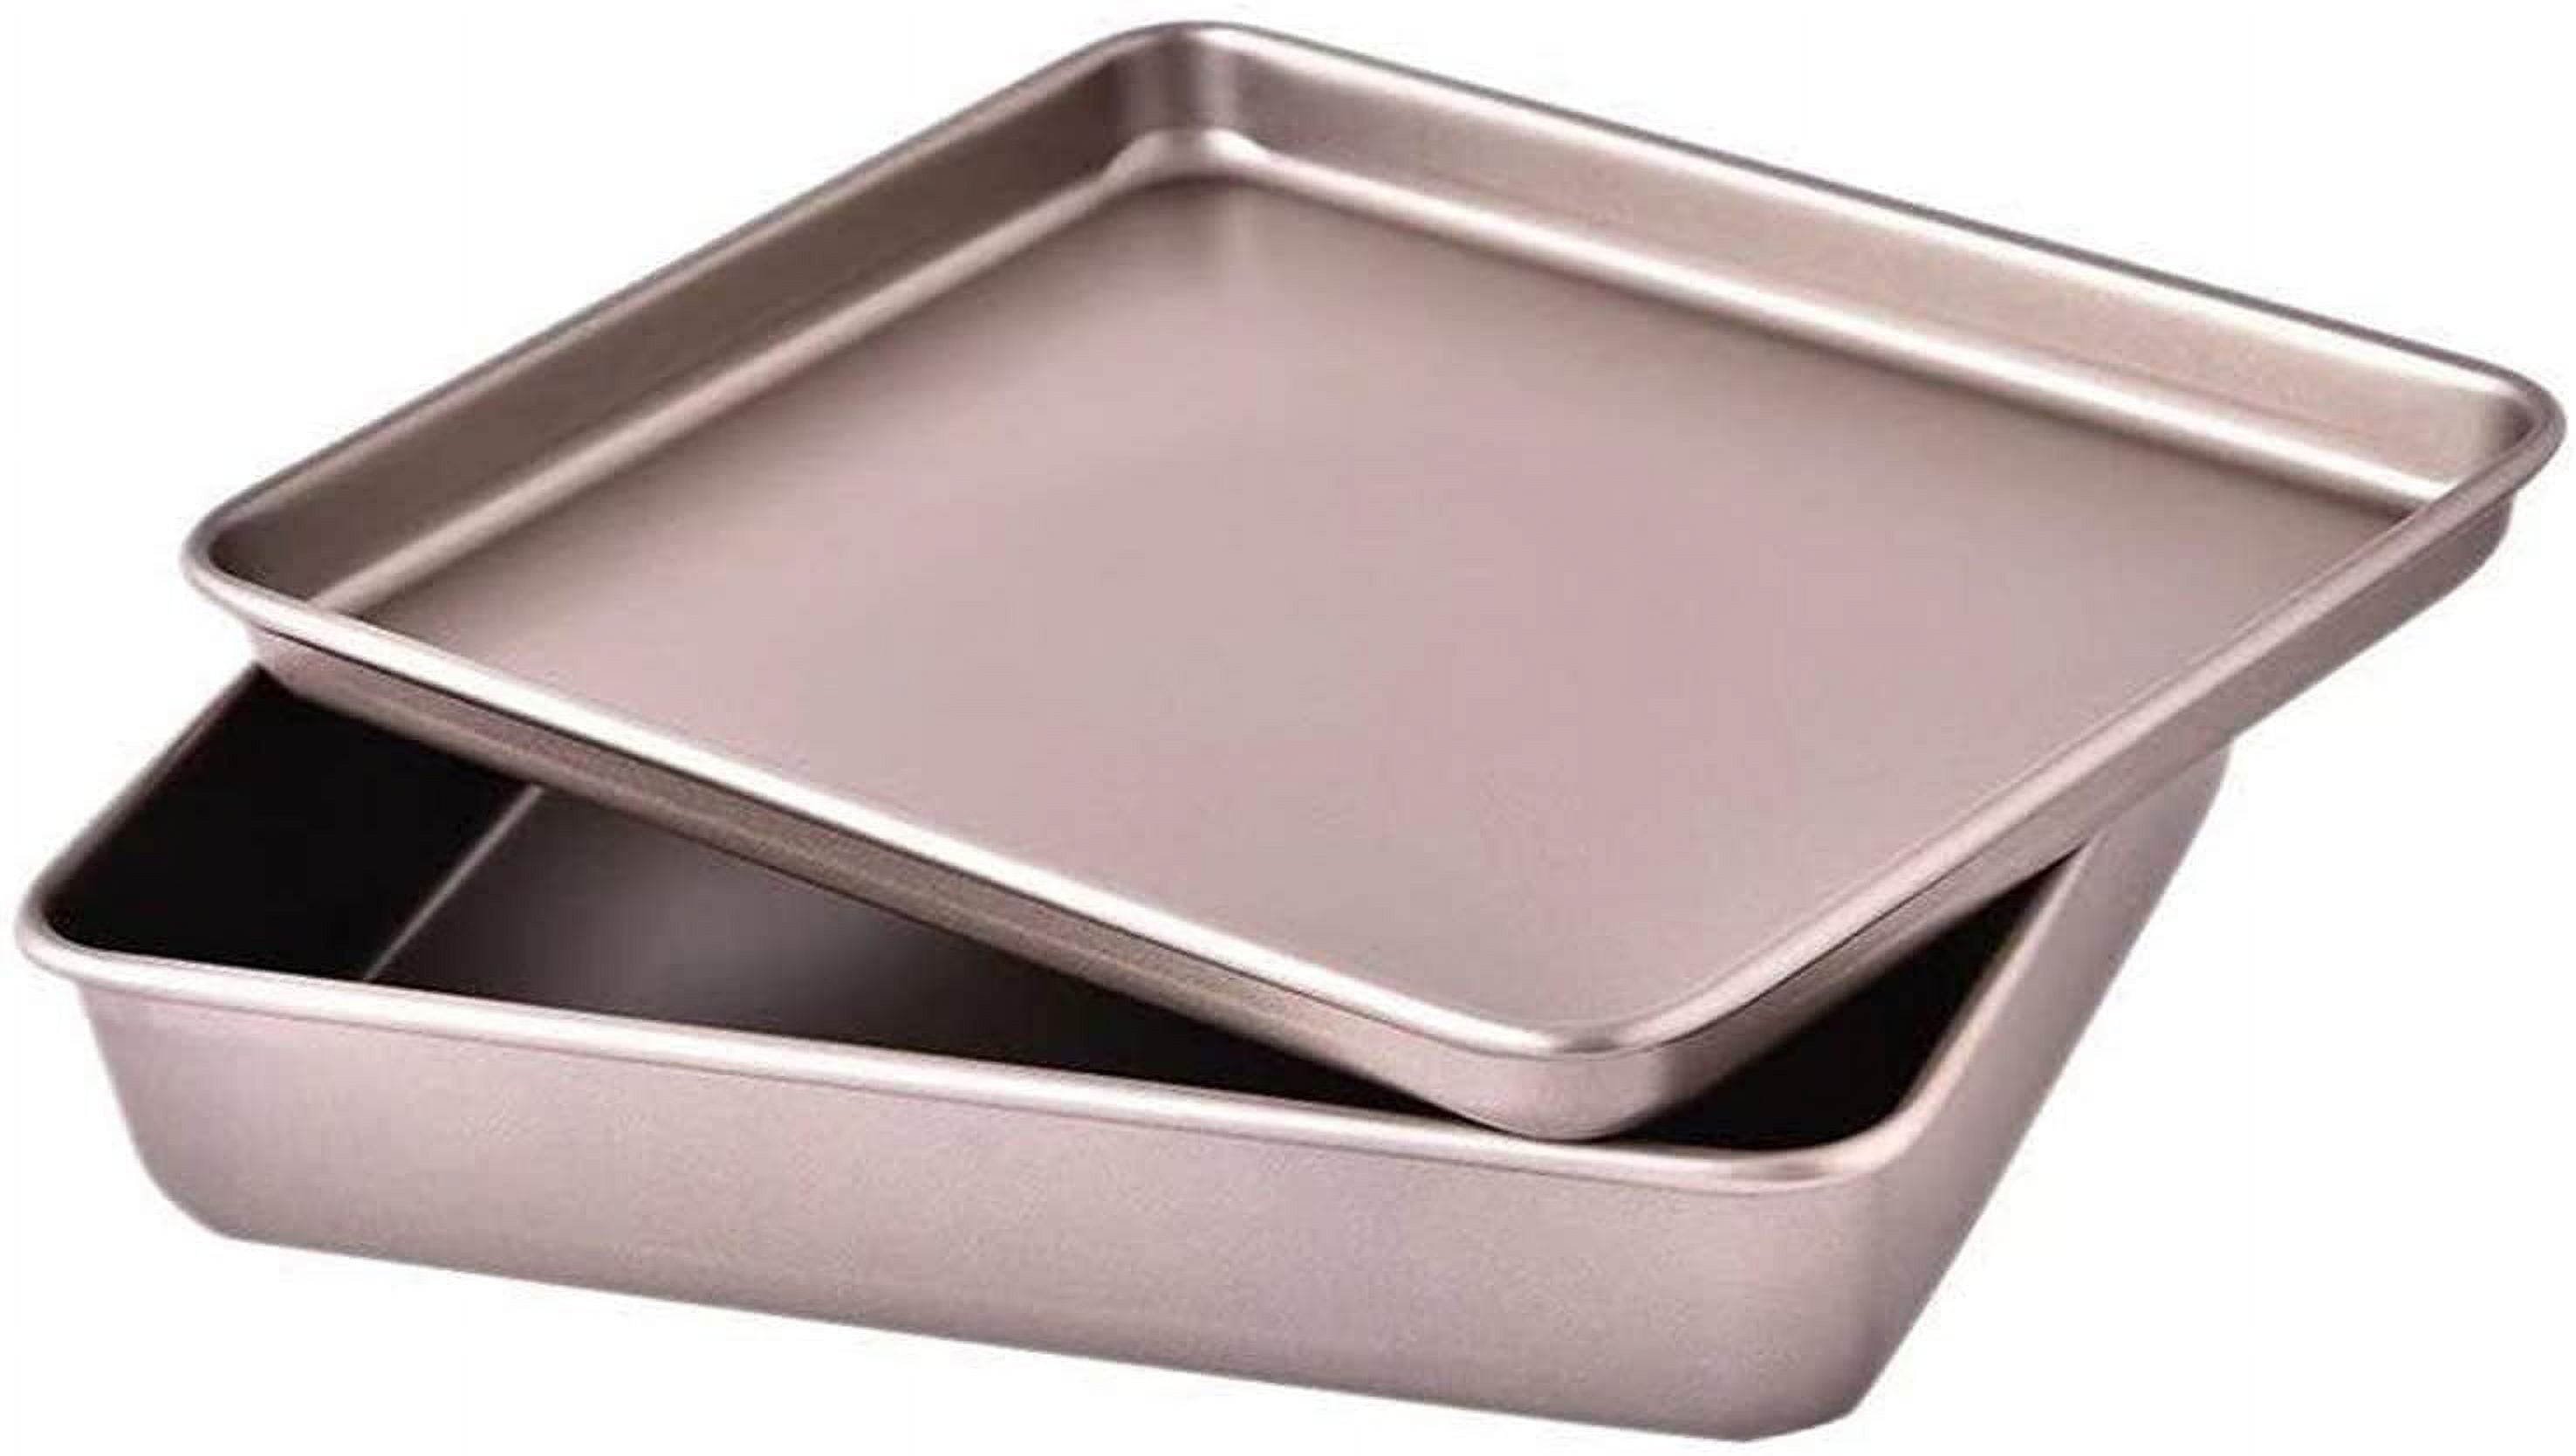 Small Cookie Sheets 11x9 inch 2pcs Mini Baking Pan Toaster Oven Tray Nonstick Thicken Brushed Carbon Steel Magnetic No Warp 1 to 2 Person Bakeware